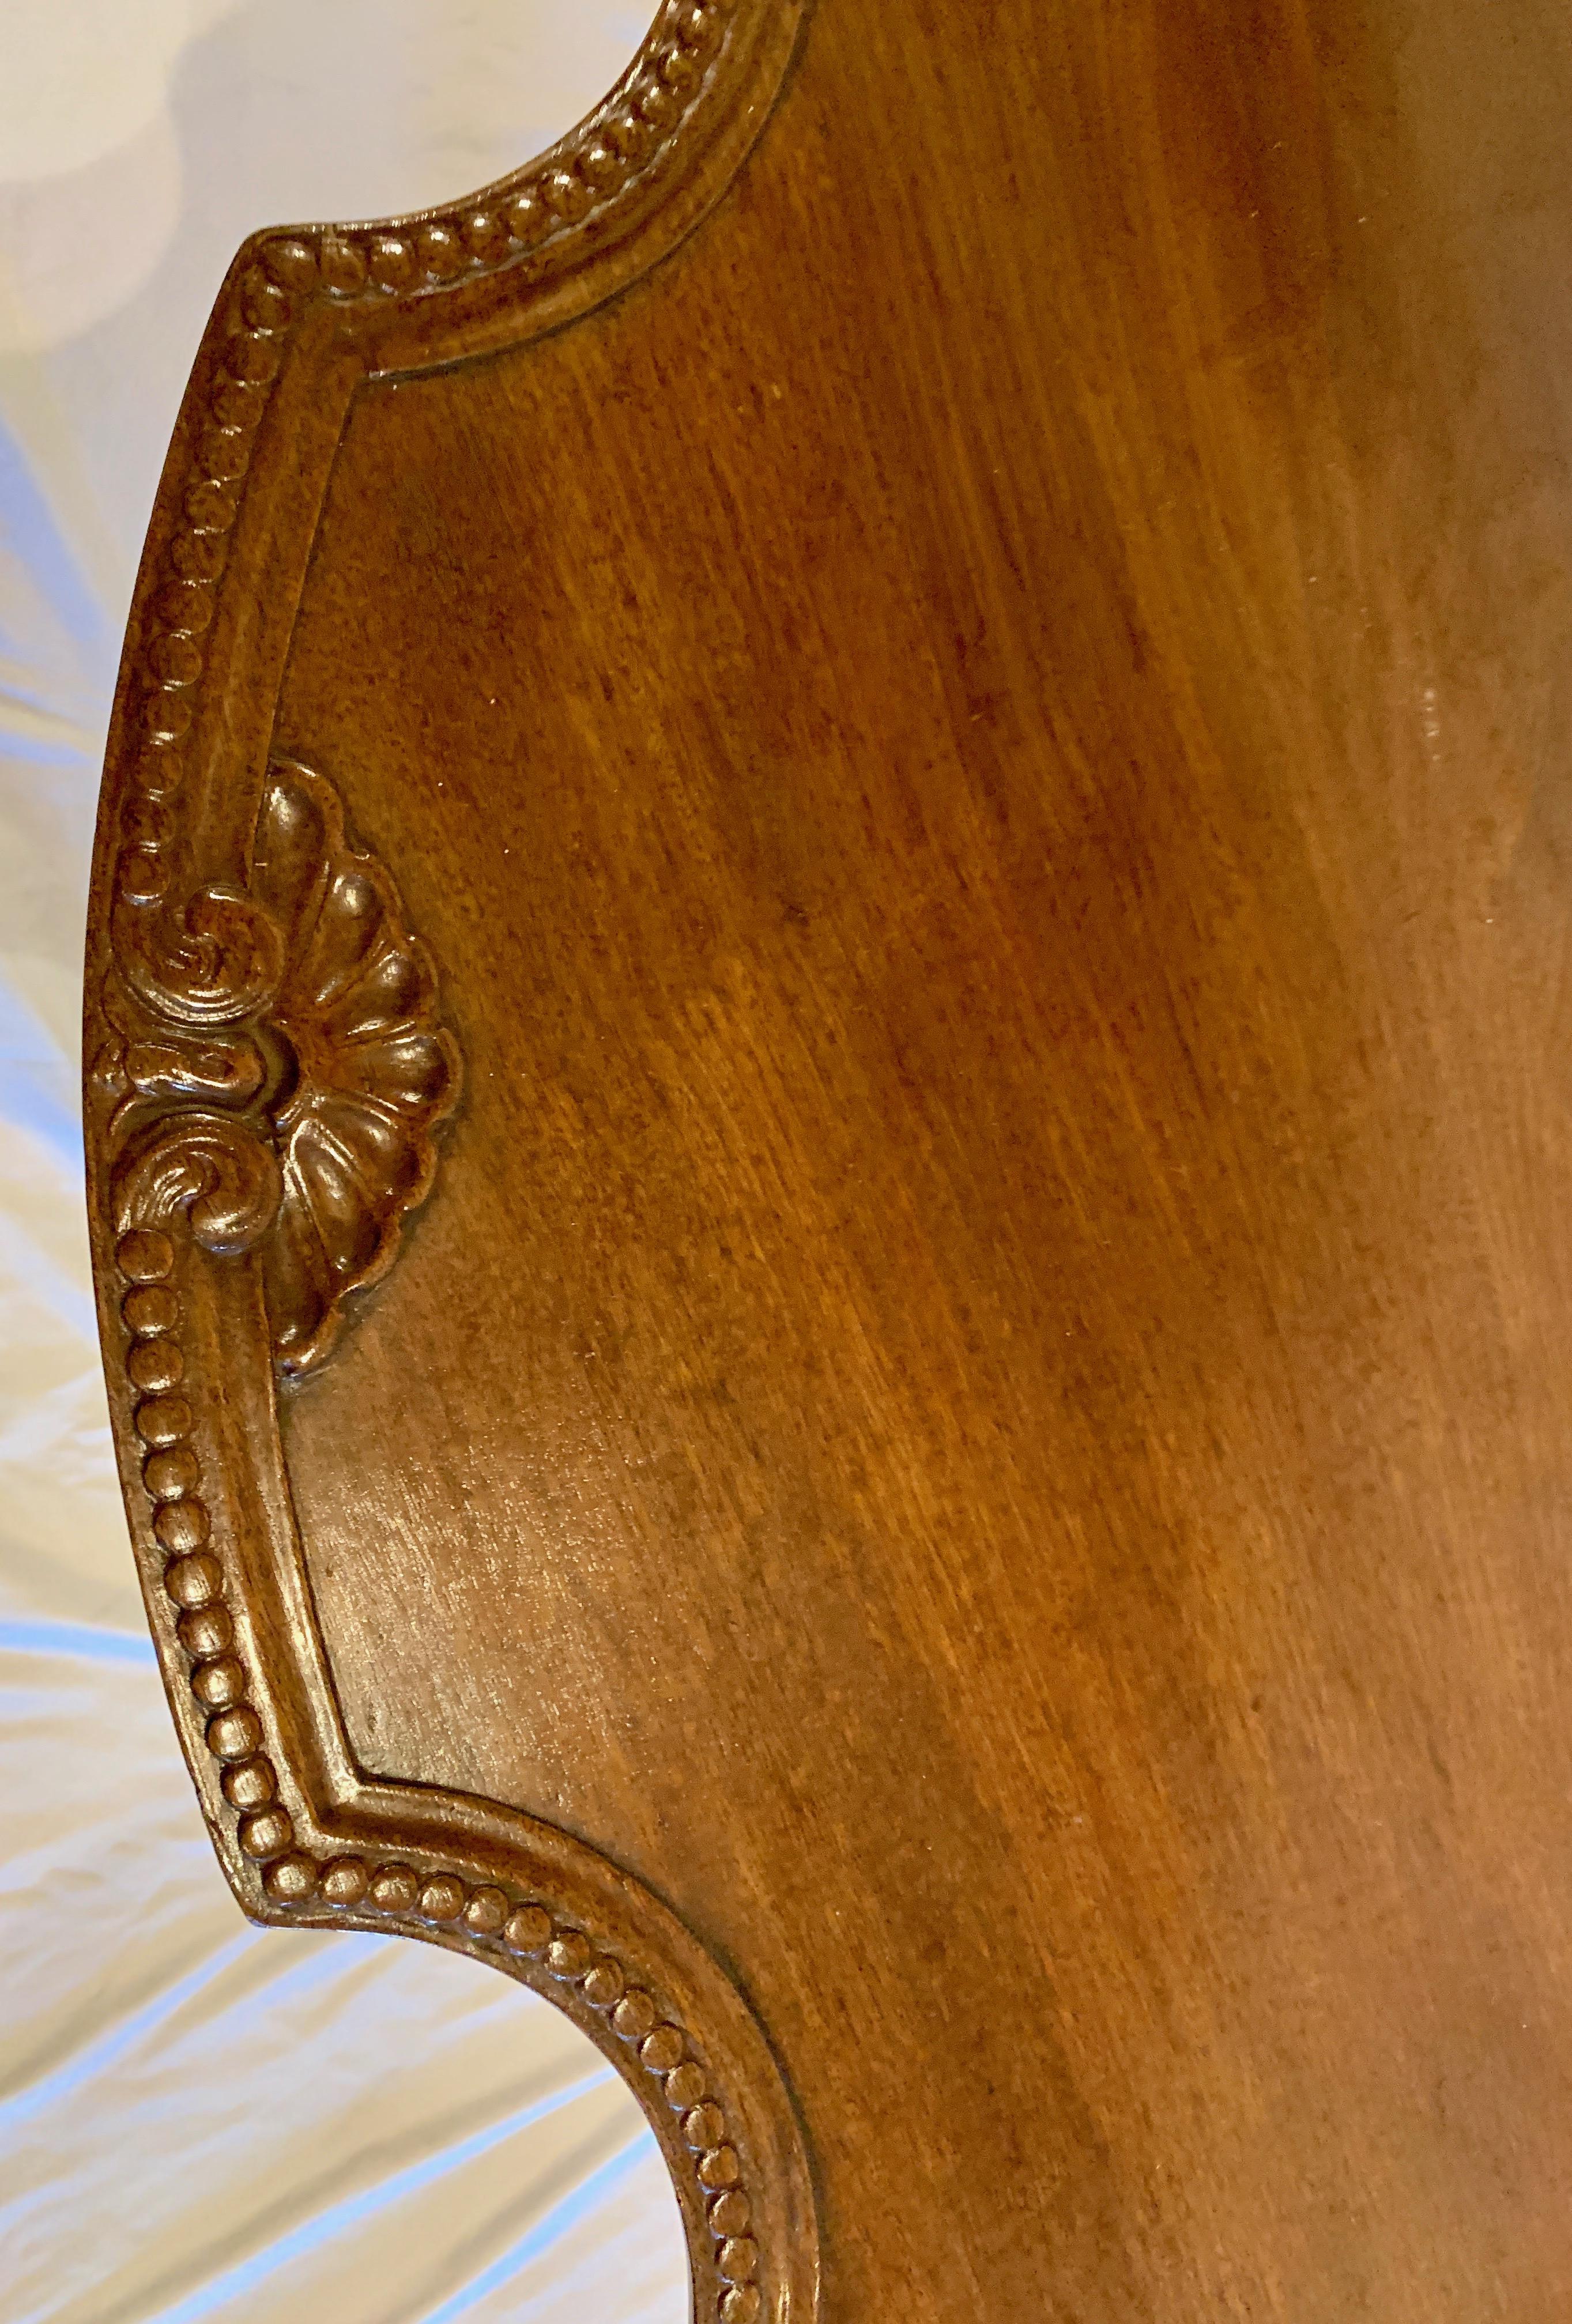 English Antique Mahogany Tilt-Top Table with Scalloped Design, circa 1860-1870 For Sale